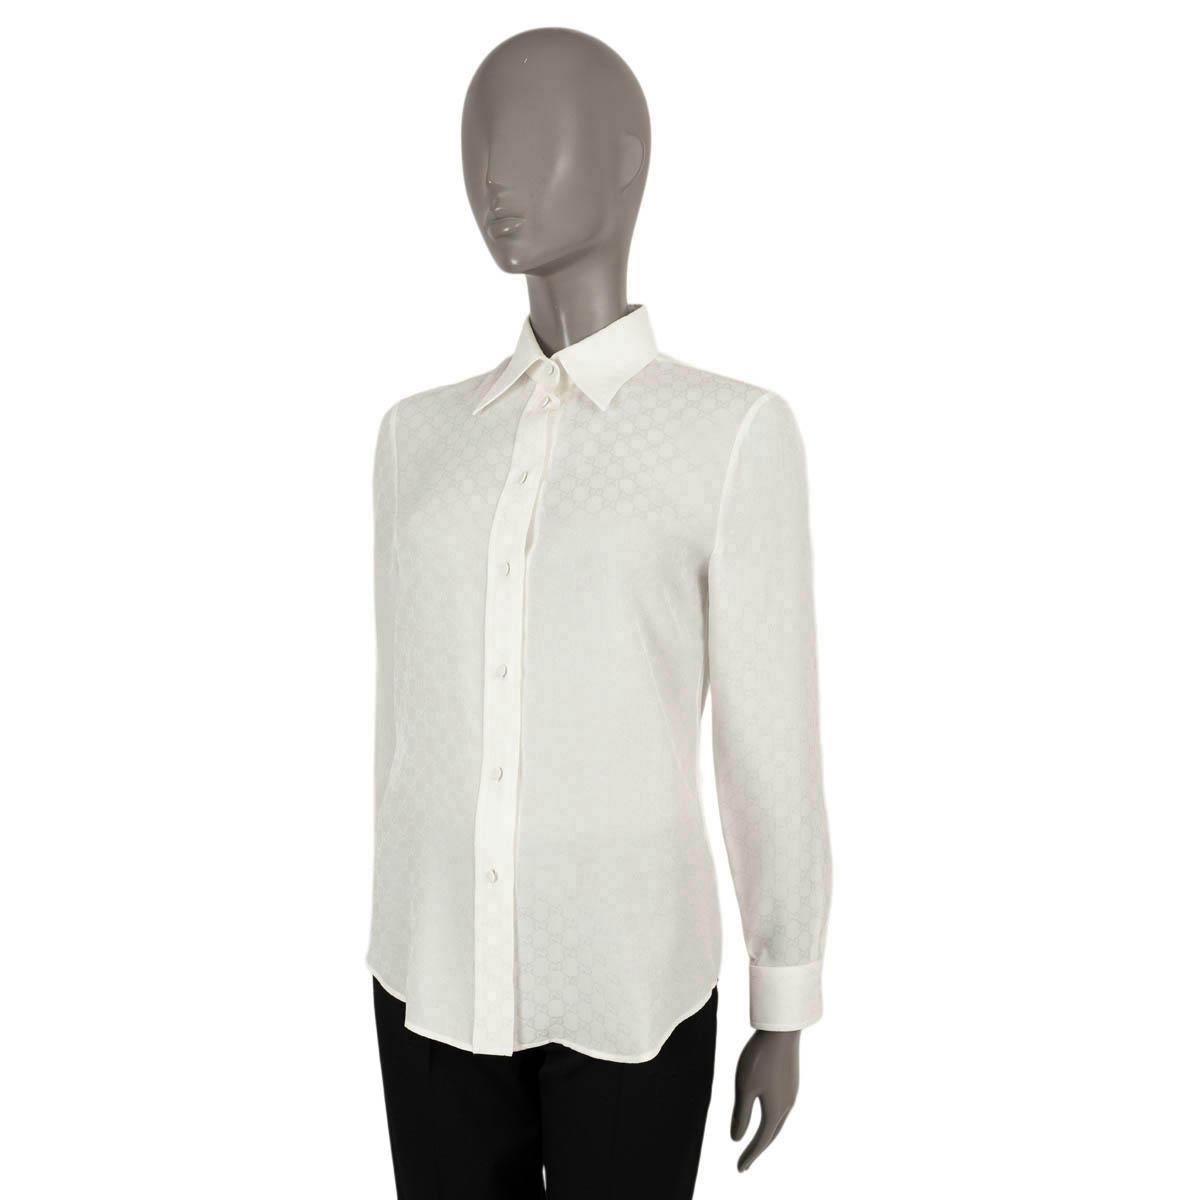 100% authentic Gucci GG crepe blouse in white silk (100%). Features a point collar and buttoned cuffs. Closes with fabric covered buttons on the front. Has been worn and is in excellent condition.

Measurements
Tag Size	38
Size	XS
Shoulder